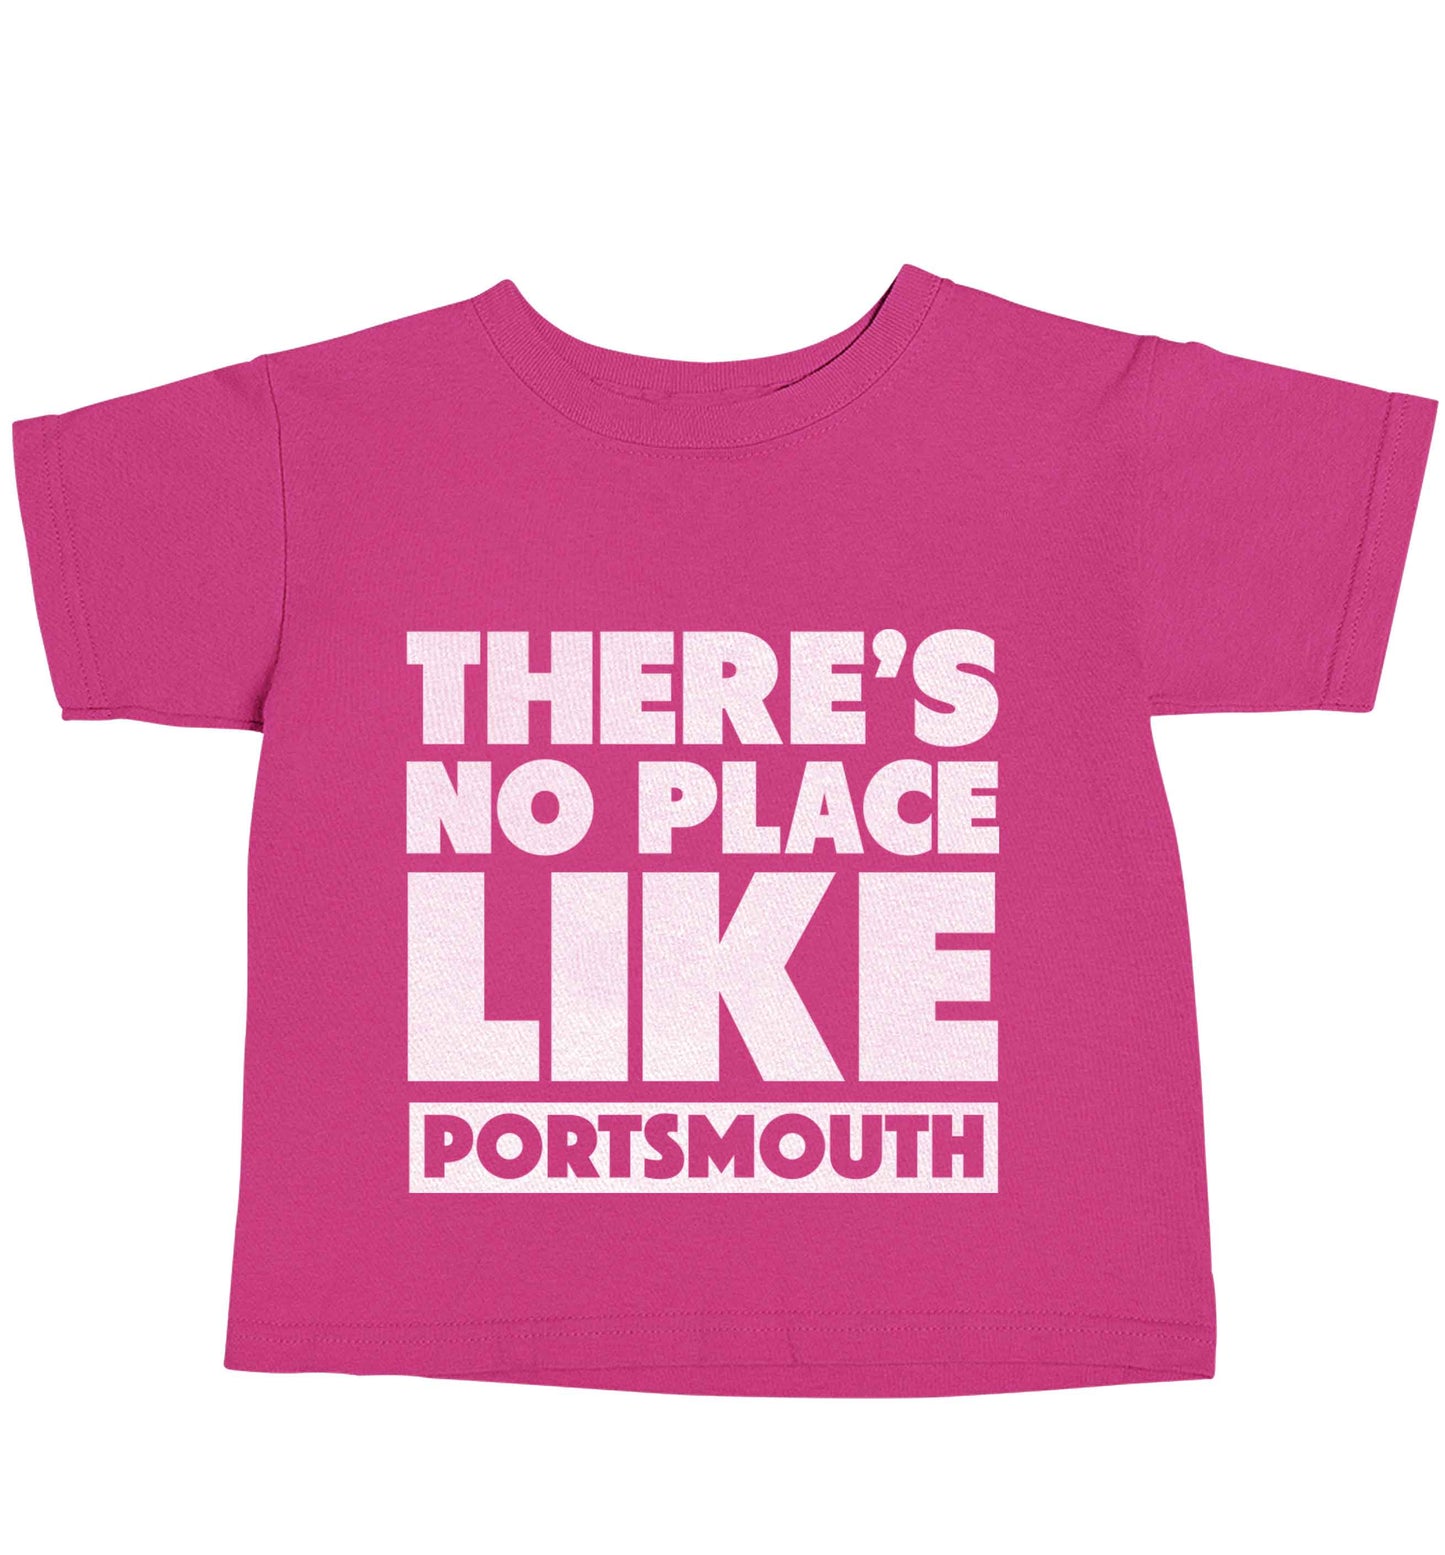 There's no place like Porstmouth pink baby toddler Tshirt 2 Years